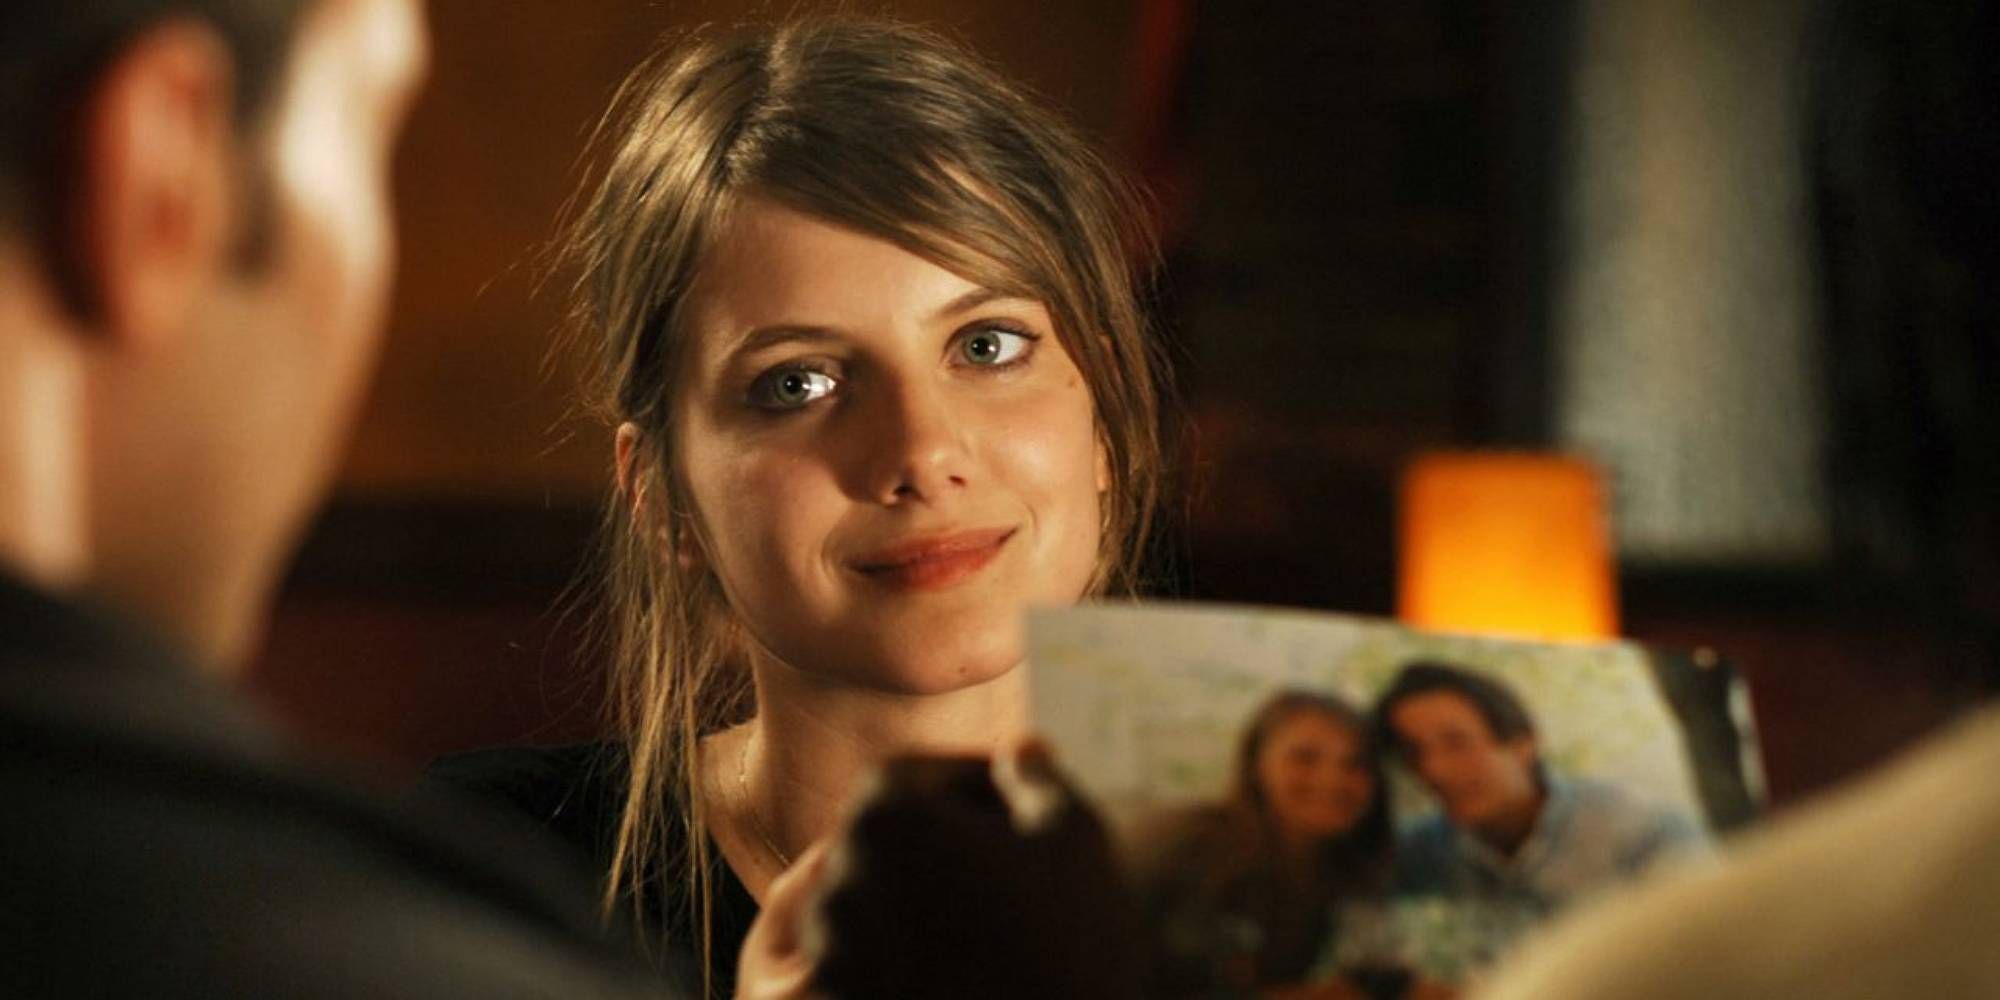 Mélanie Laurent in Don't Worry, I'm Fine smiling.